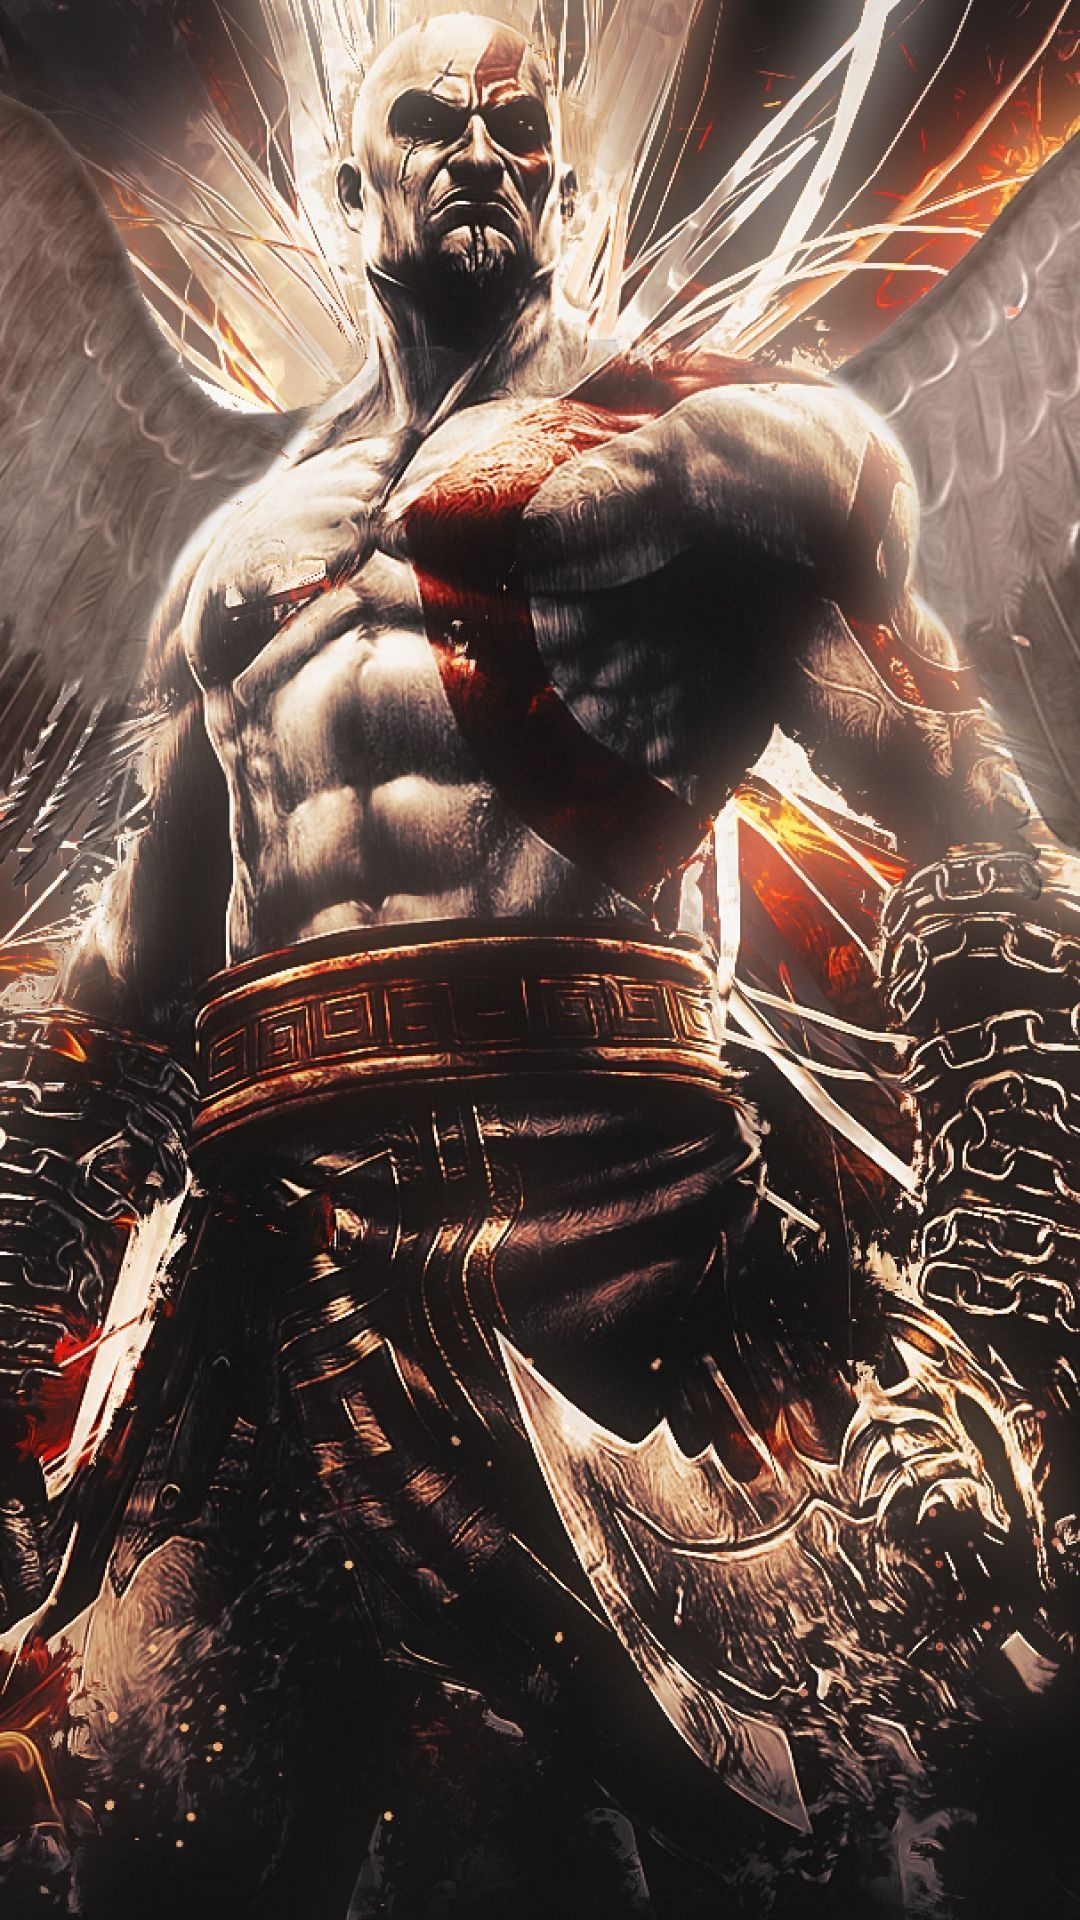 God of War iPhone wallpapers, 4K gaming backgrounds, Epic game visuals, Mobile customization, 1080x1920 Full HD Handy